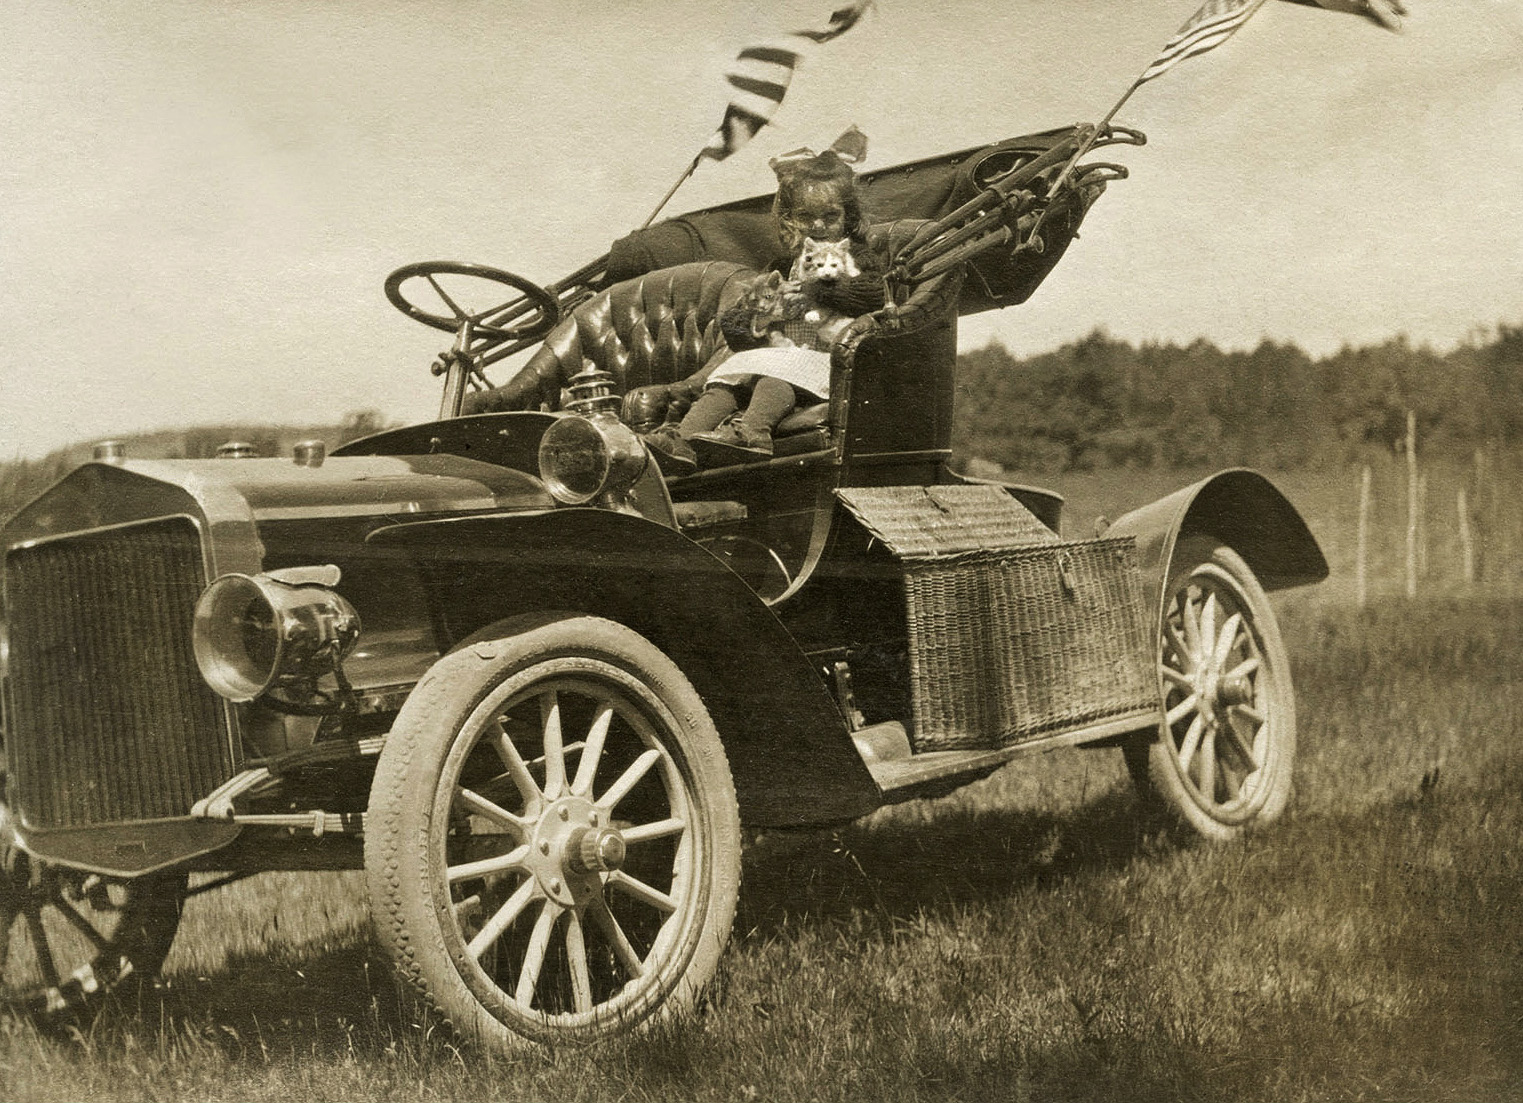 One of my ancestors in the family's car. Worcester, Massachusetts. 1914. View full size.